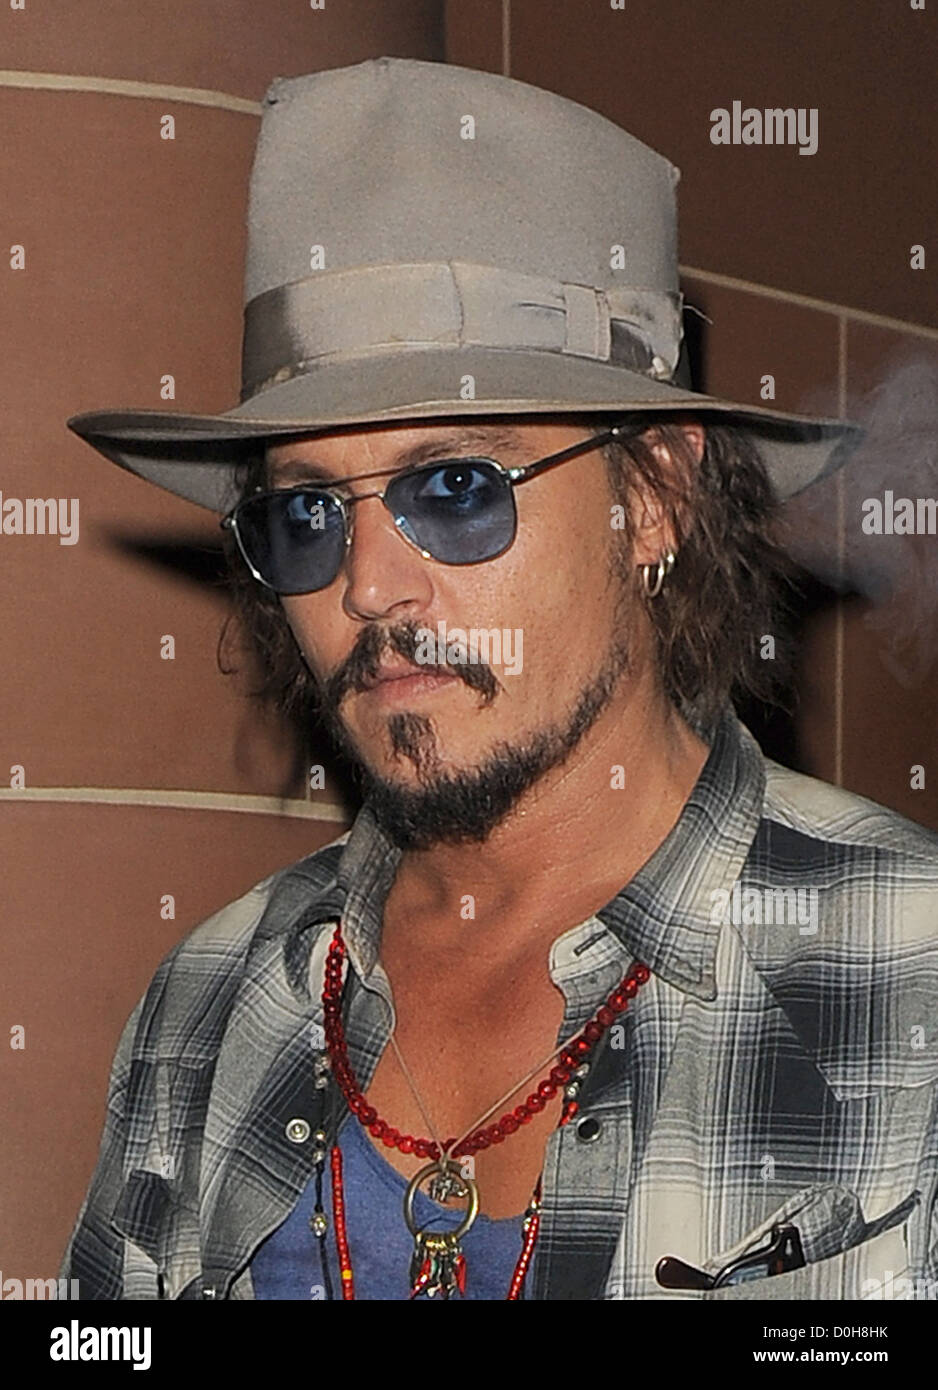 Johnny Depp, wearing a fedora hat and sunglasses, leaving 'C London'  restaurant. Depp was sporting some cuts on his face, and a Stock Photo -  Alamy